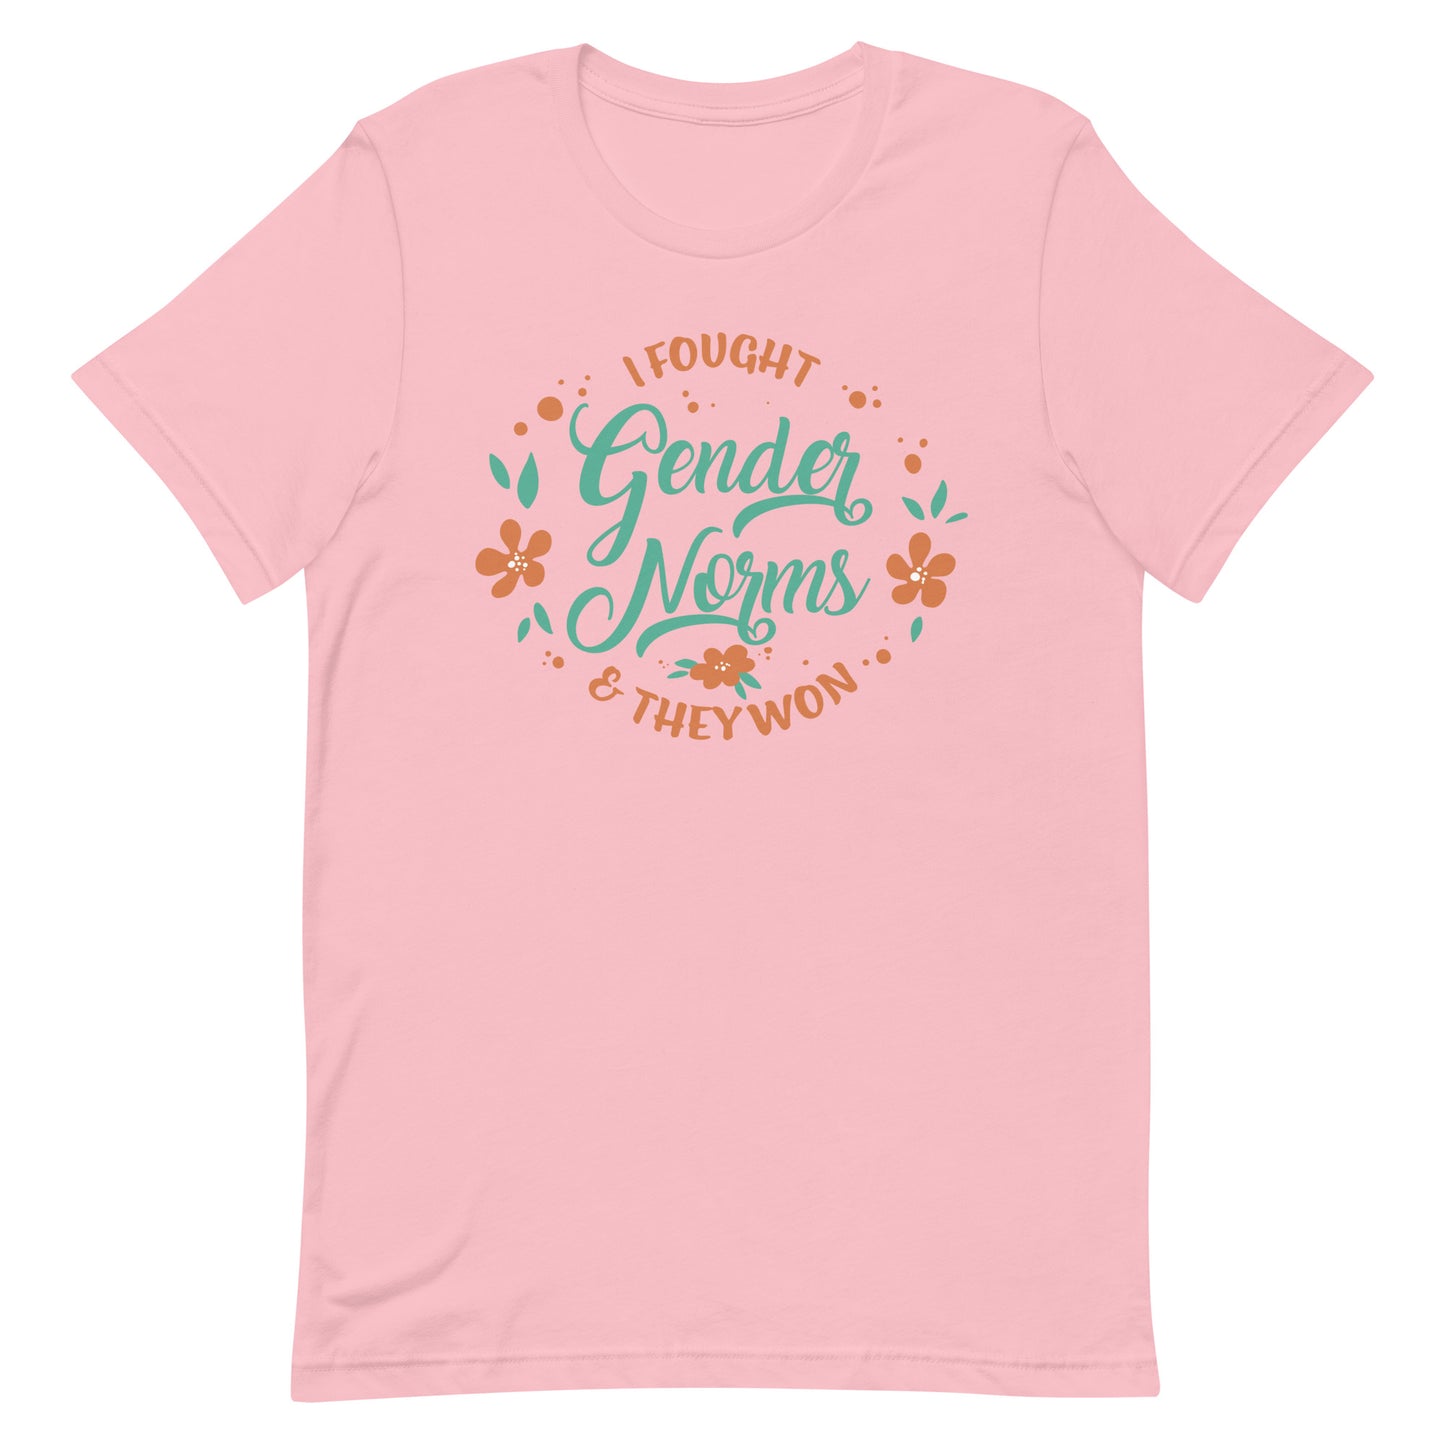 I Fought Gender Norms and They Won Unisex t-shirt